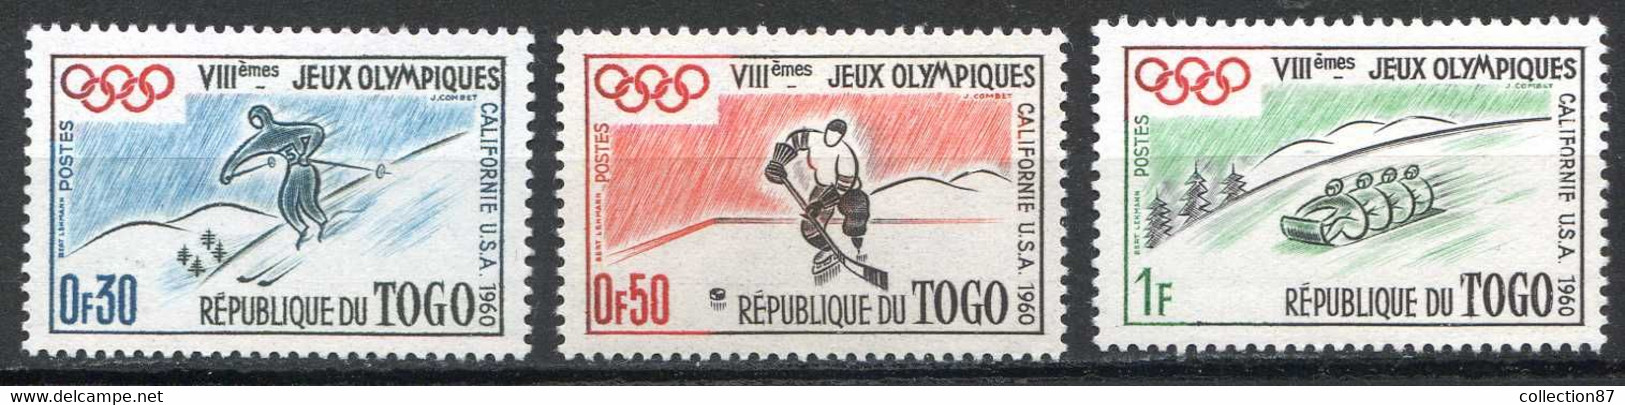 JEUX OLYMPIQUES D'HIVER 1960 ⭐⭐ TOGO 3 Valeurs NEUF Luxe - MNH ⭐⭐ > SKI - HOCKEY - LUGE - Invierno 1960: Squaw Valley